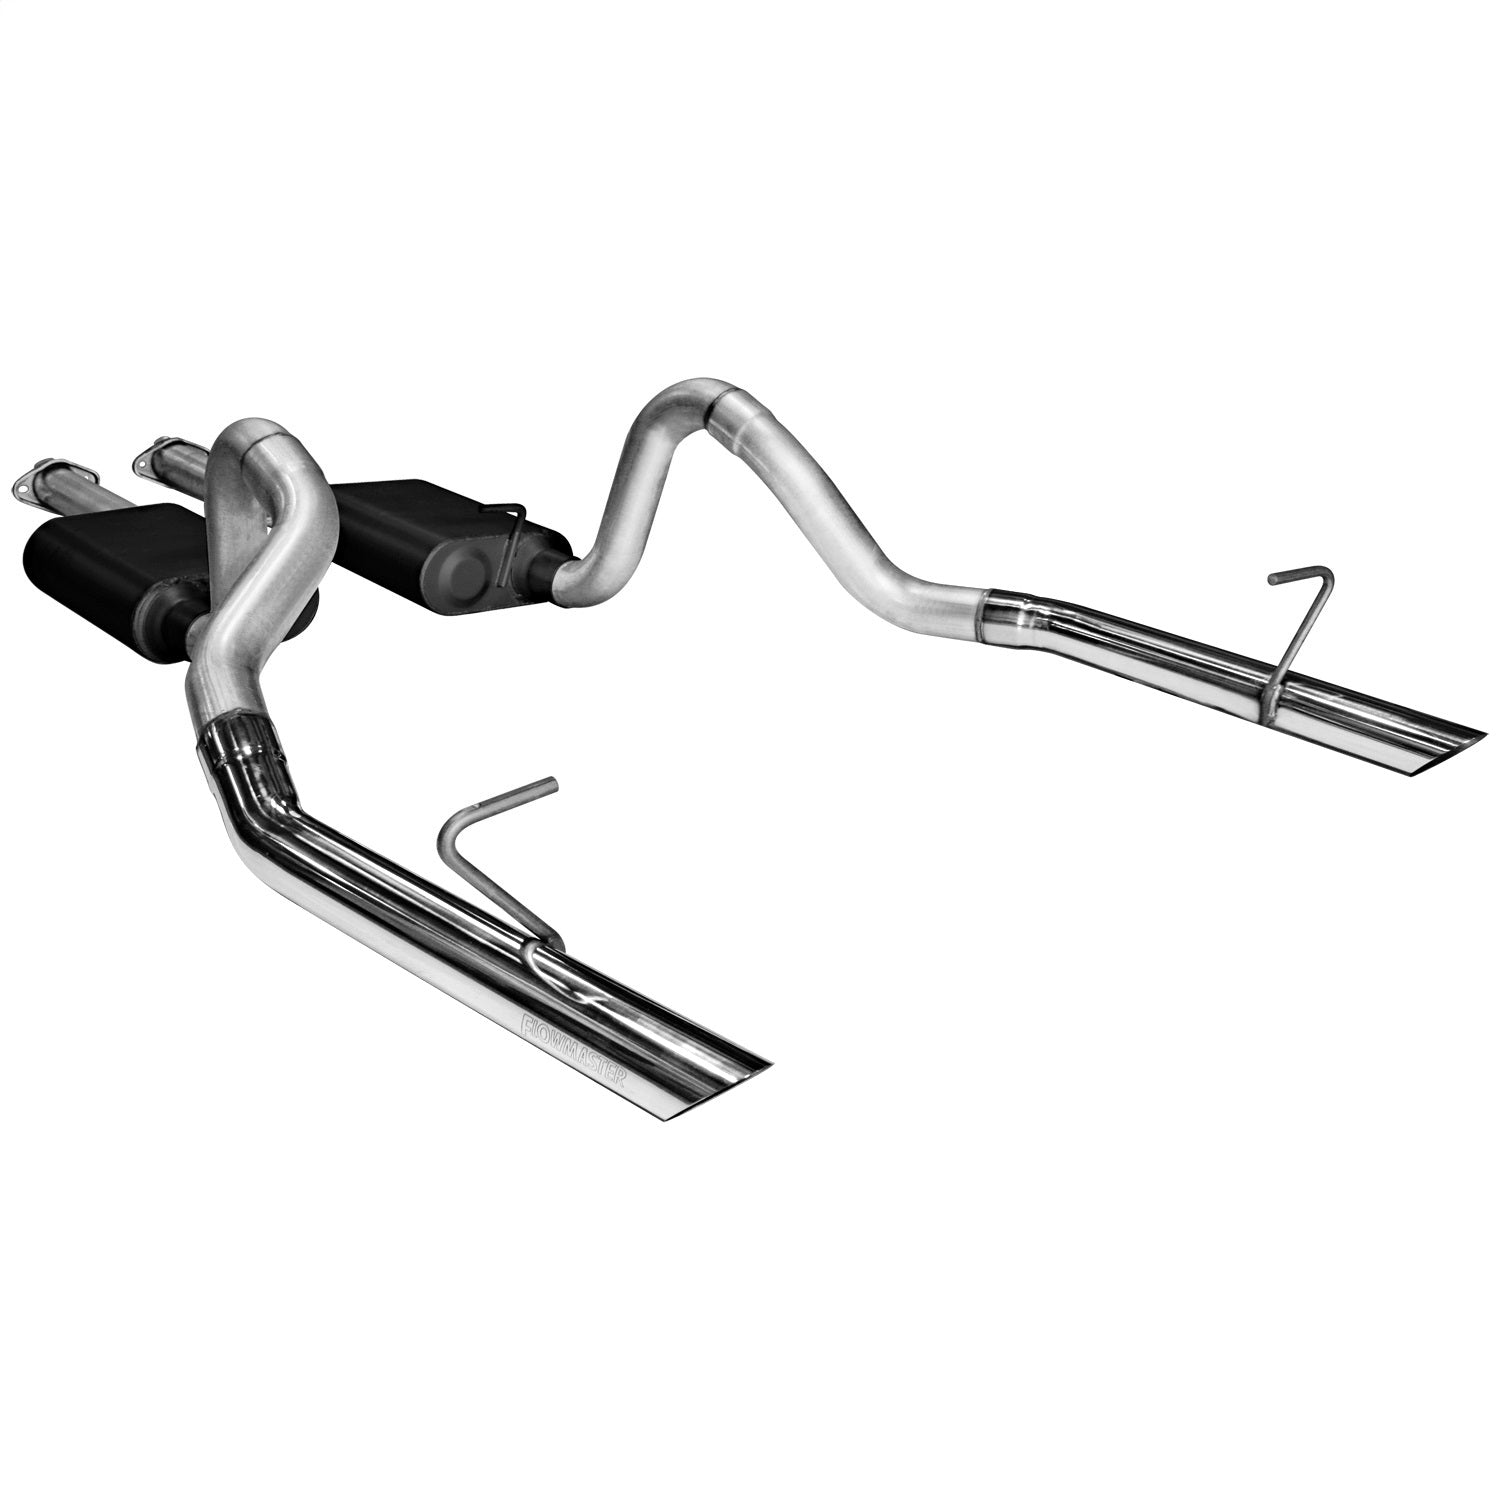 Flowmaster 17213 American Thunder Cat Back Exhaust System Fits 86-93 Mustang